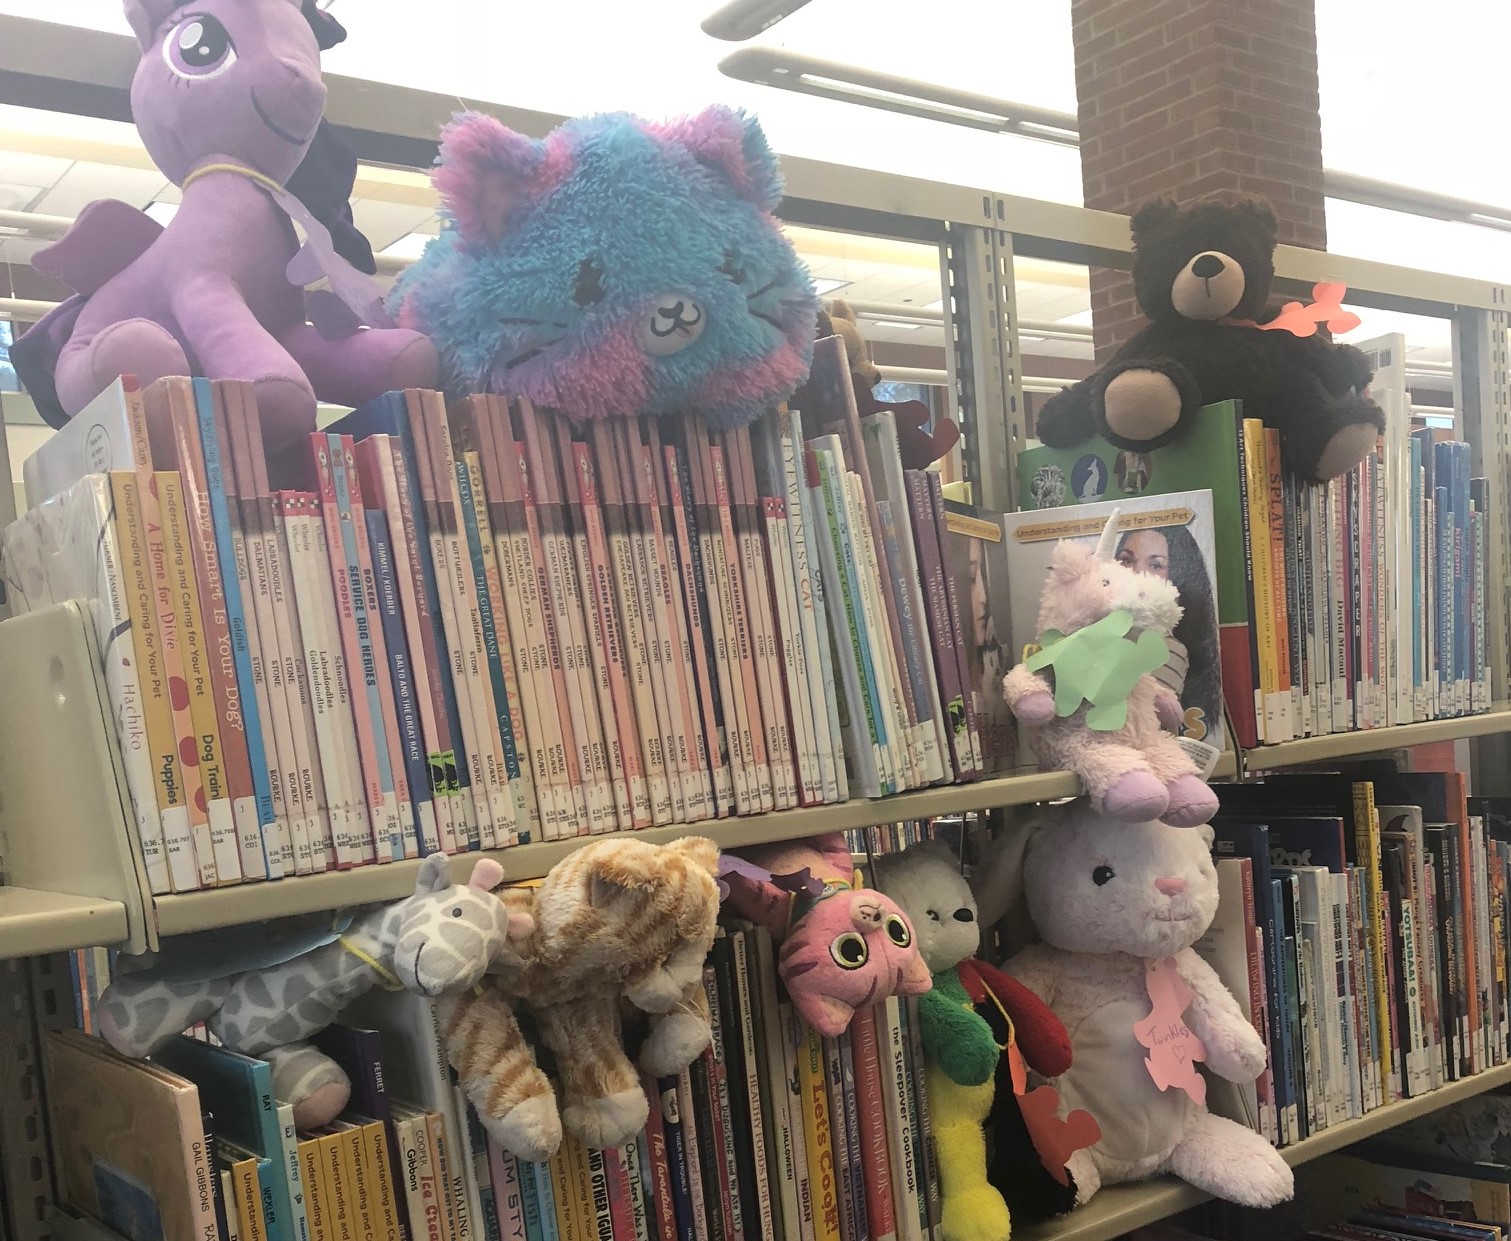 Stuffed animals in juvenile nonfiction book section.